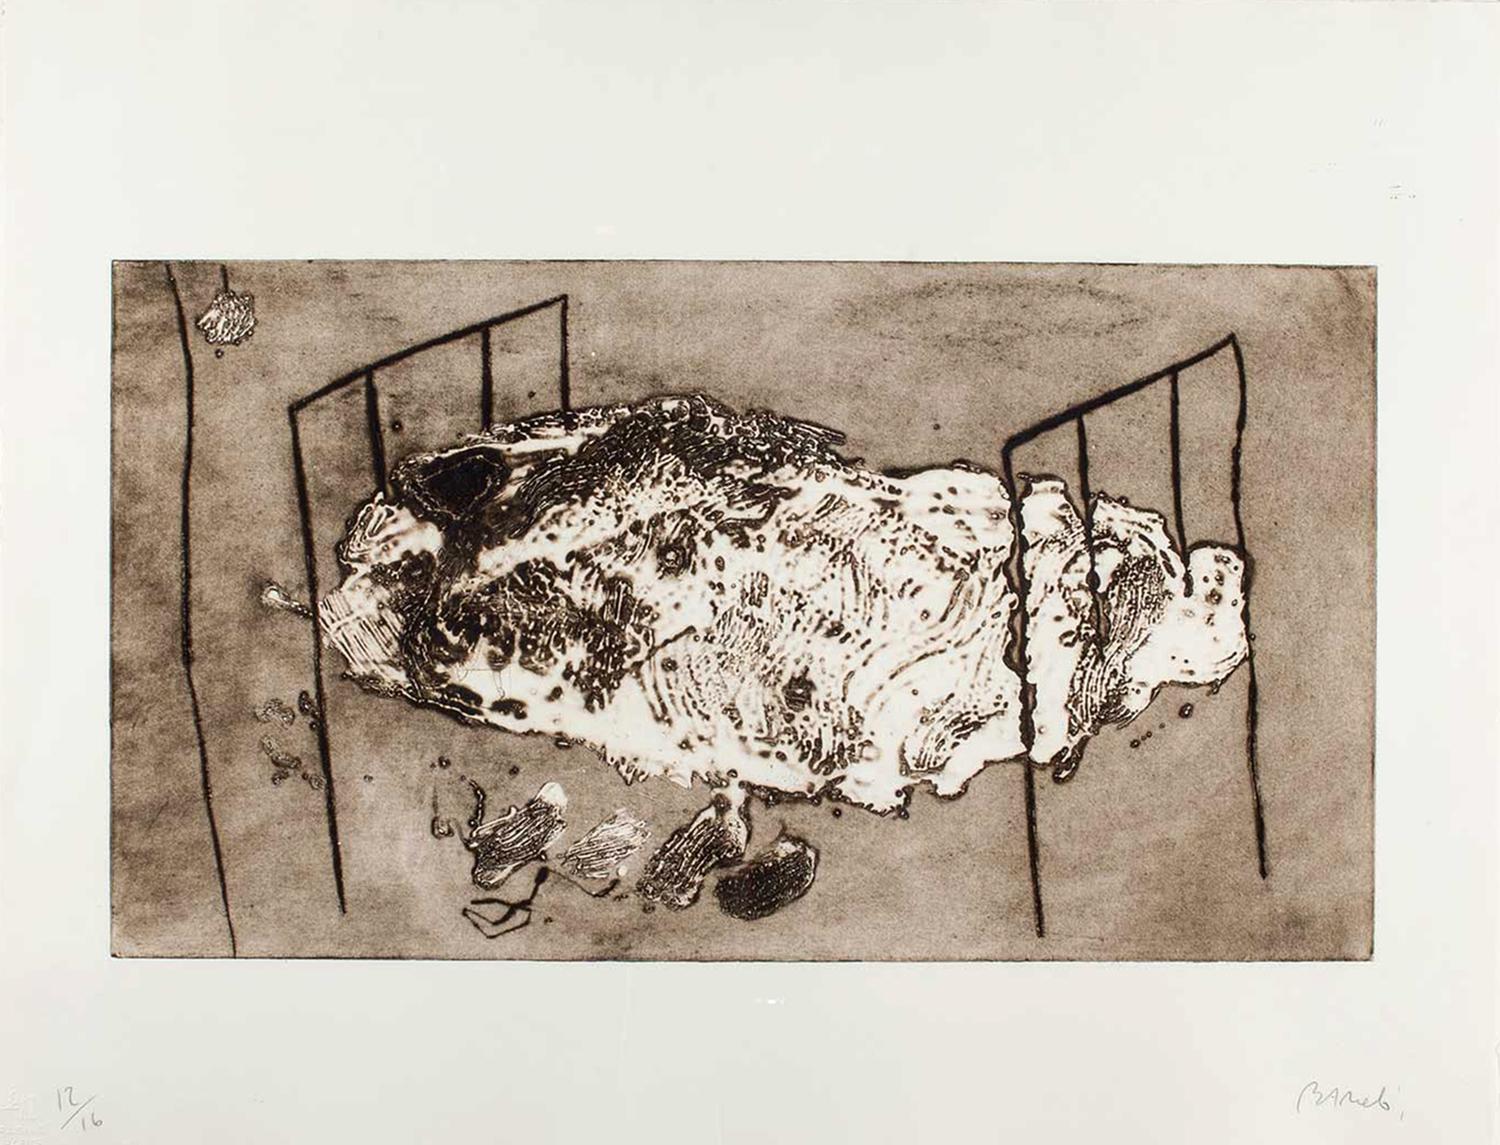 MIQUEL BARCELÓ, 1987
Engraving signed and numbered in pencil
Edition of 16 copies
Measurements of the work: 50x 65 cm
Measures of the framed work: 58 x 74 cm

Painter and sculptor, Barceló began his training at the School of Arts and Crafts in Palma